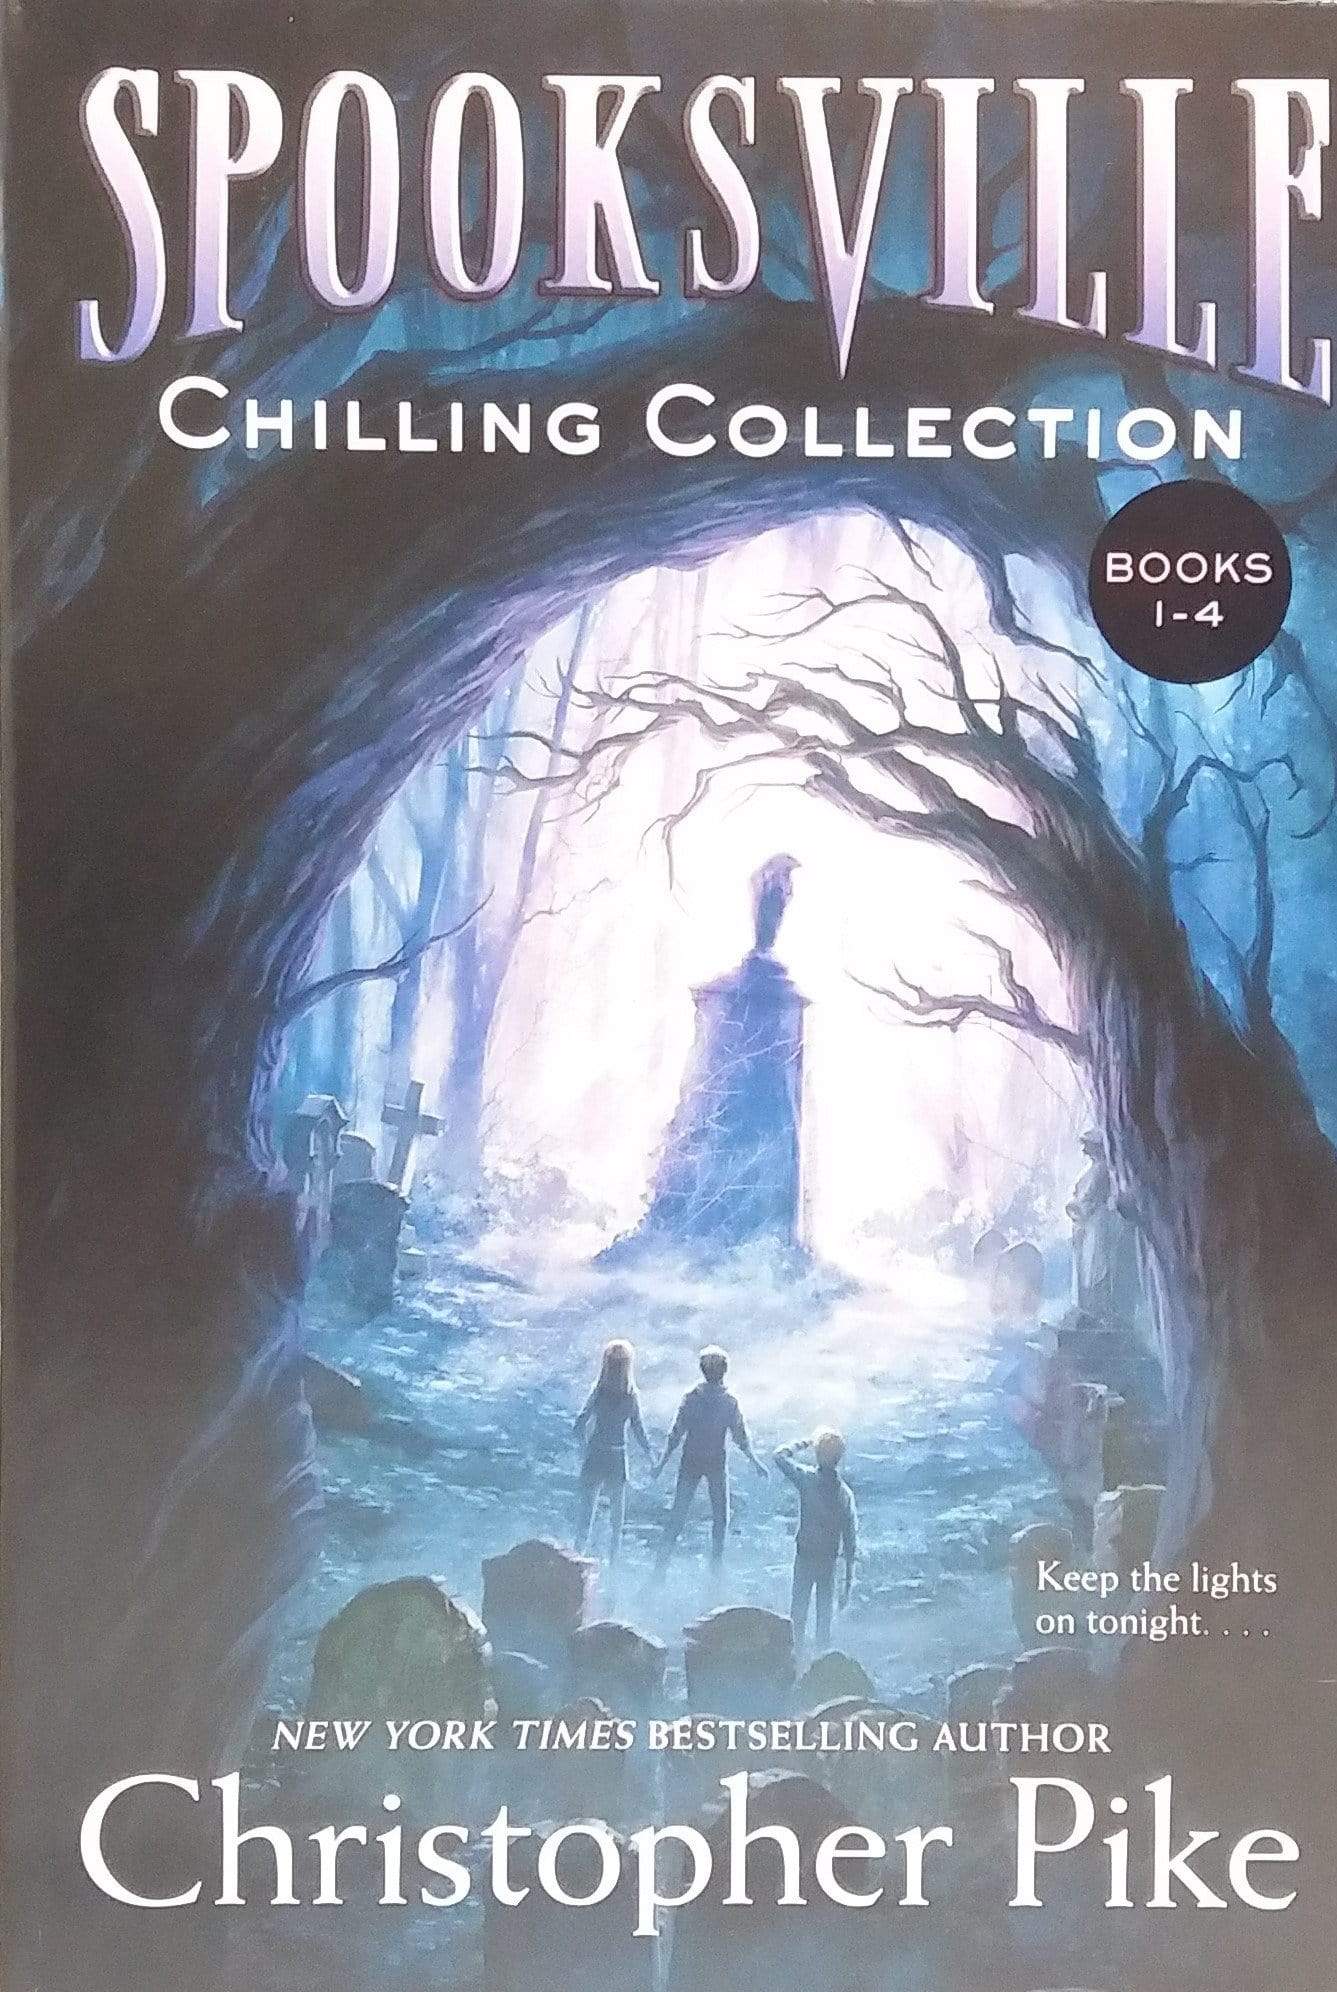 Spooksville Chilling Collection Books 1-4